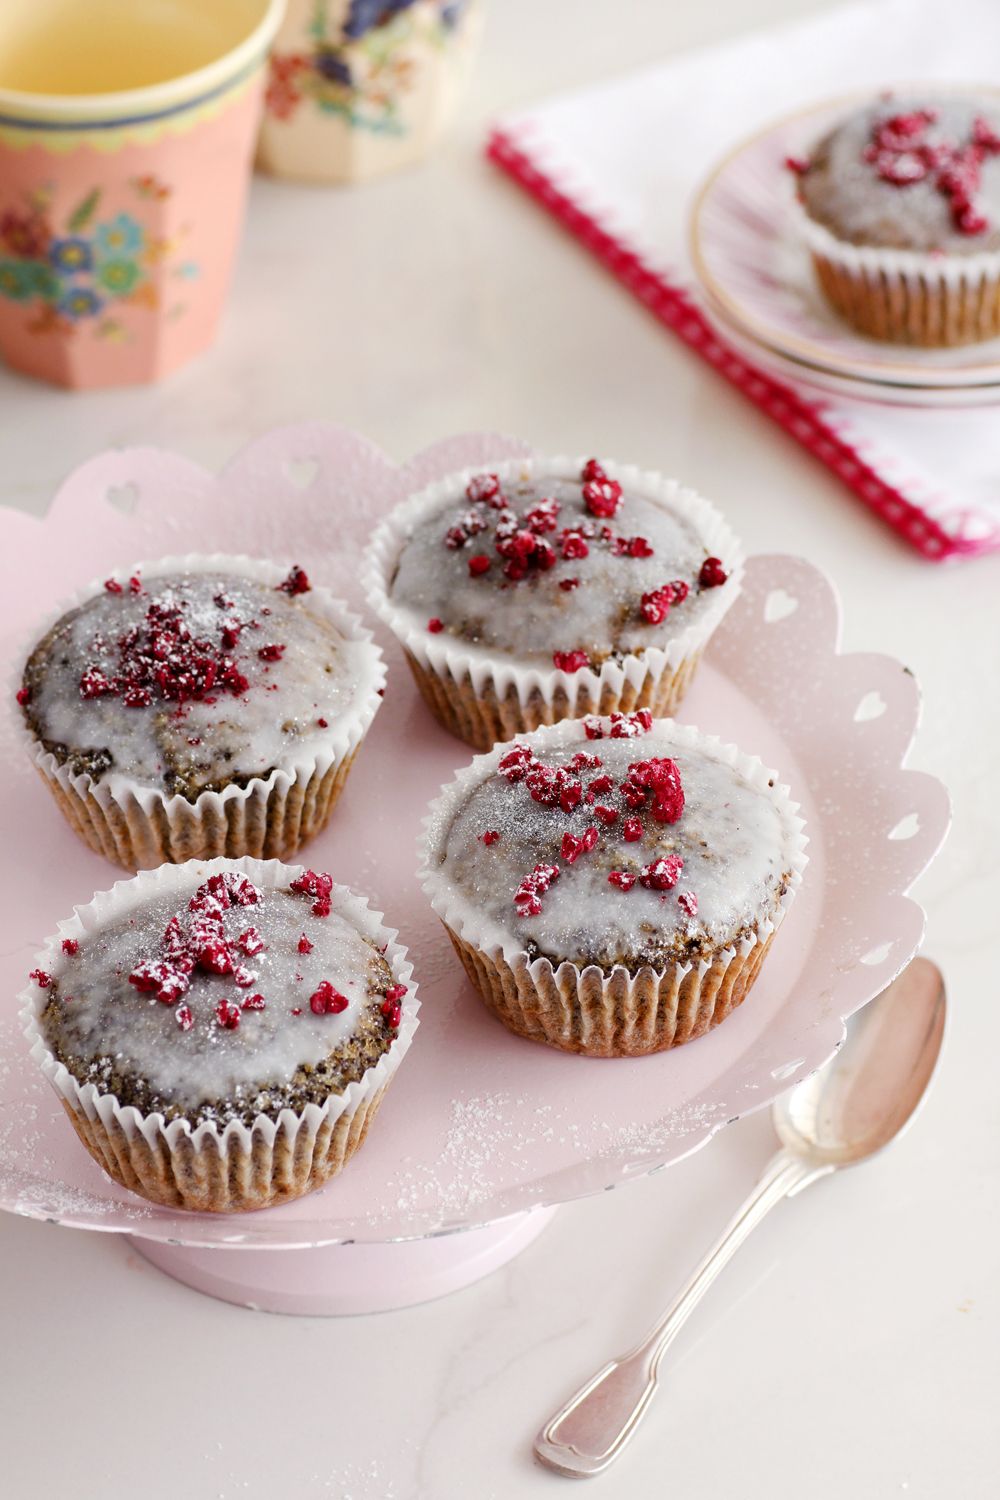 Raspberry Poppy Seeds Muffins with Chia